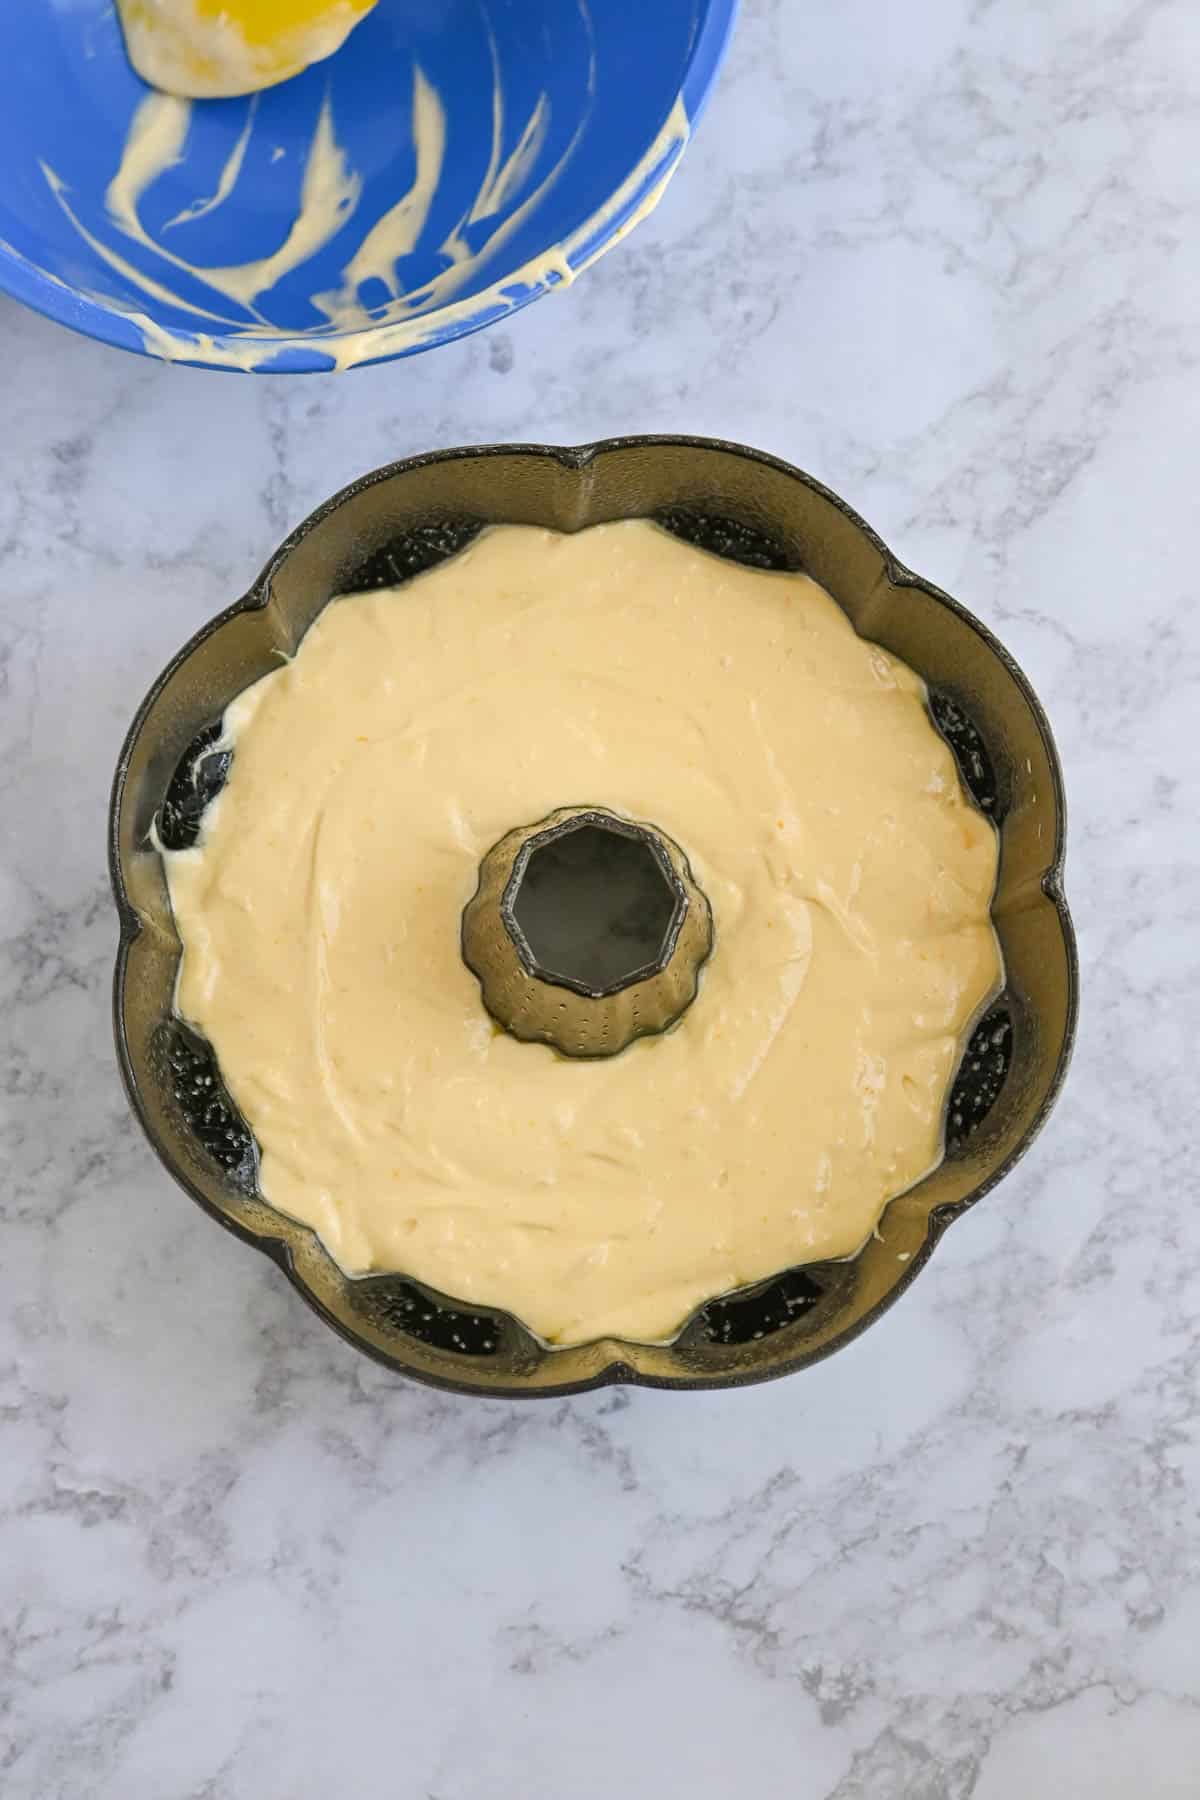 A bundt pan filled with cake batter is placed on a marble countertop. A partially empty blue bowl with remnants of batter is in the background.